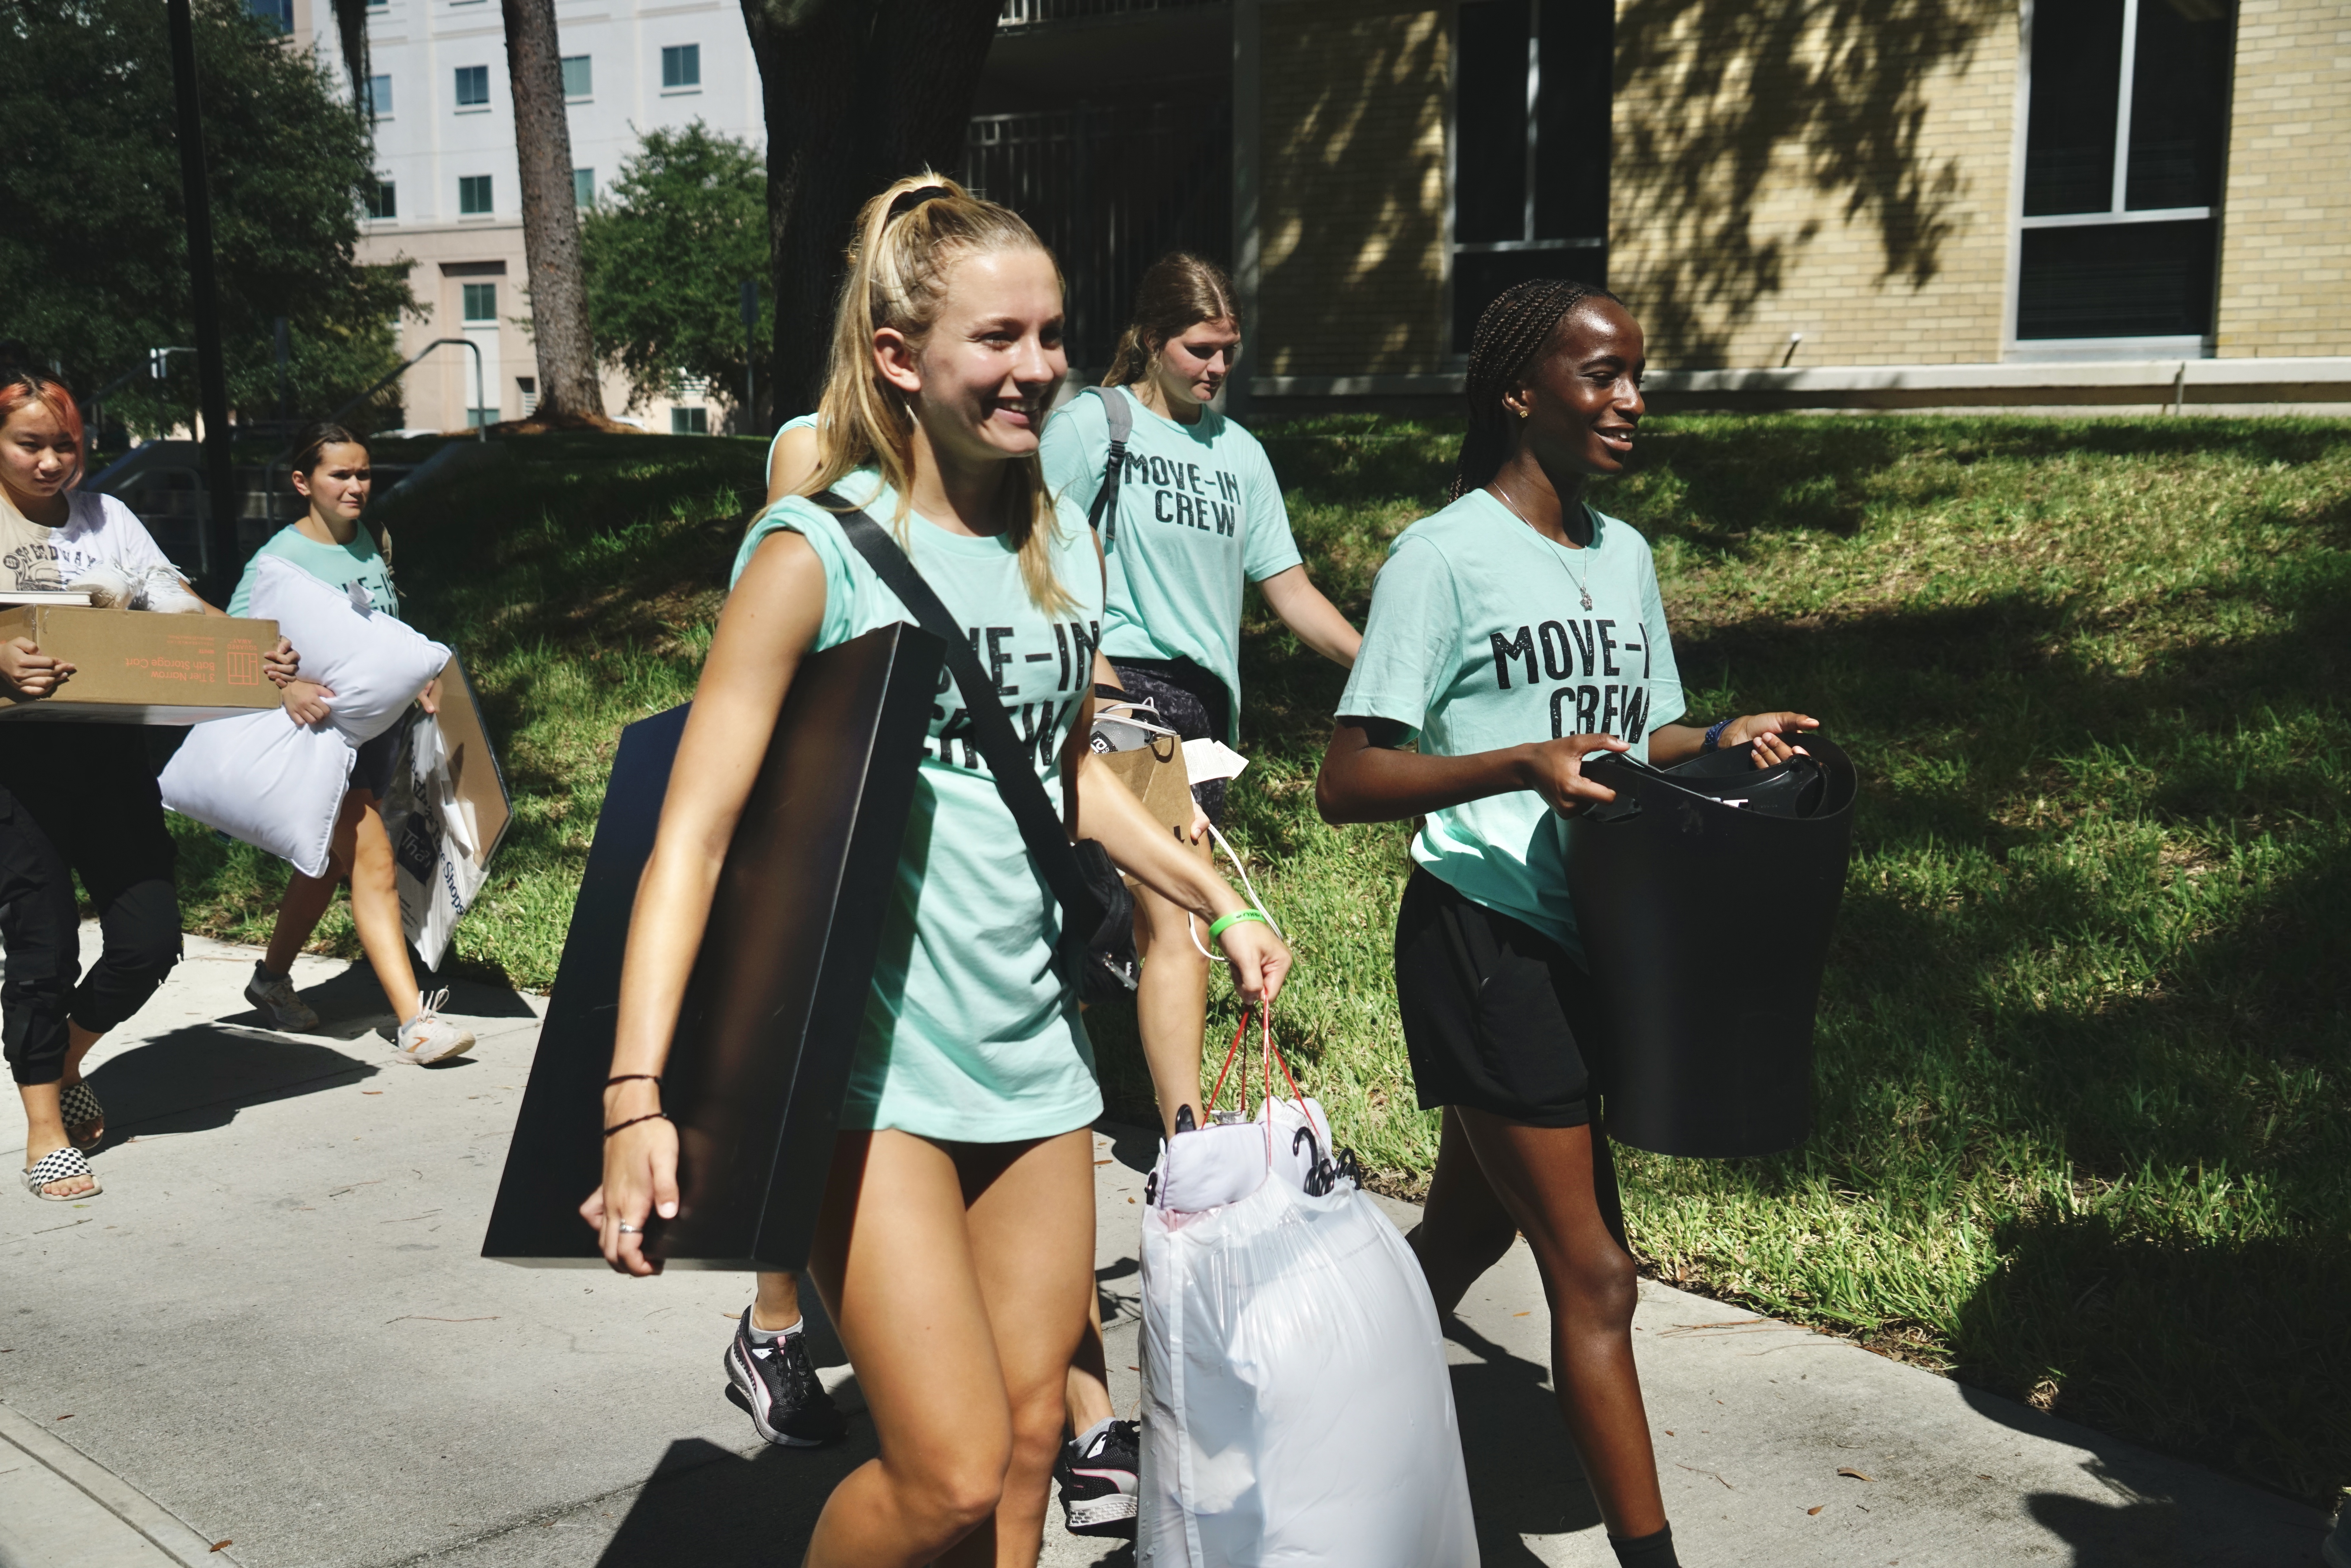  Smiling students help carry items inside during move-in.